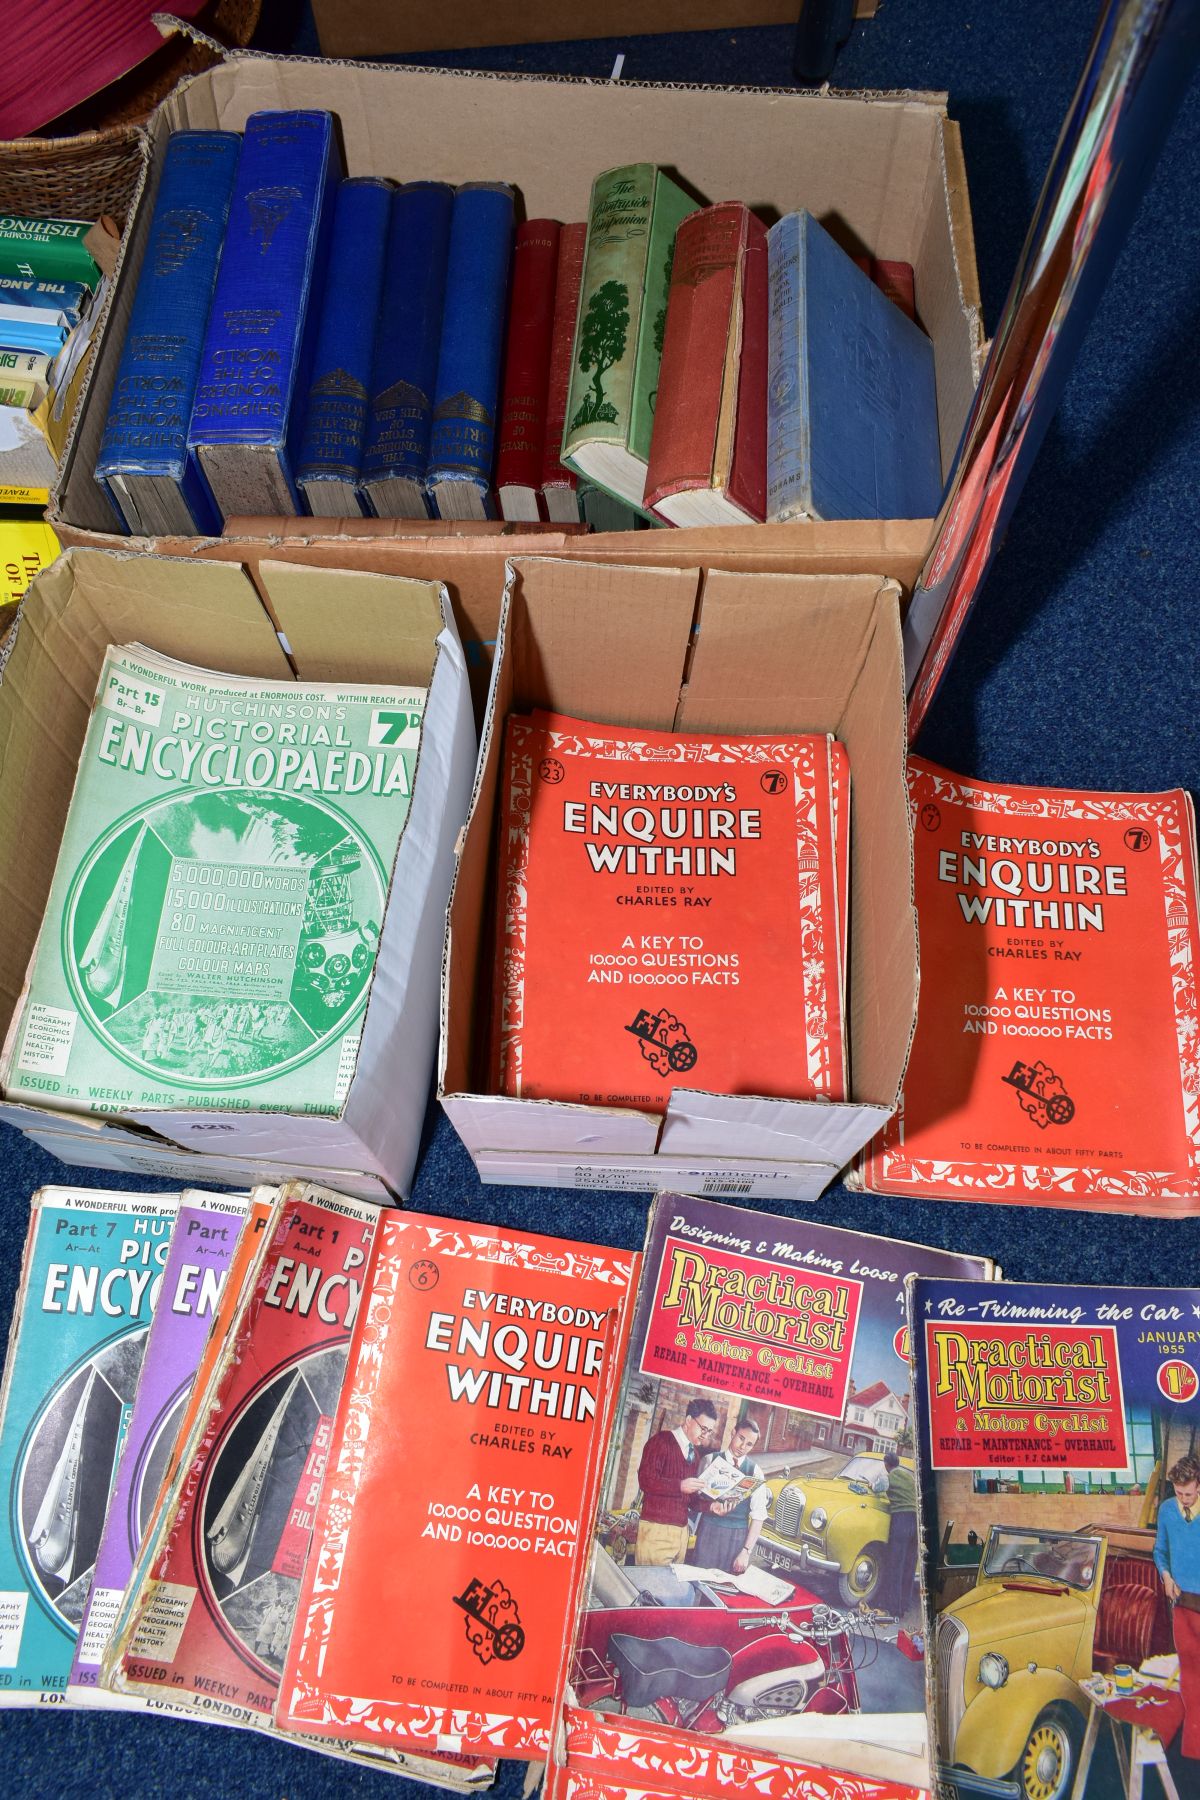 BOOK AND PUBLICATIONS to include Hutchinsons Pictorial Encyclopaedia (1-80), Everybodys Enquire